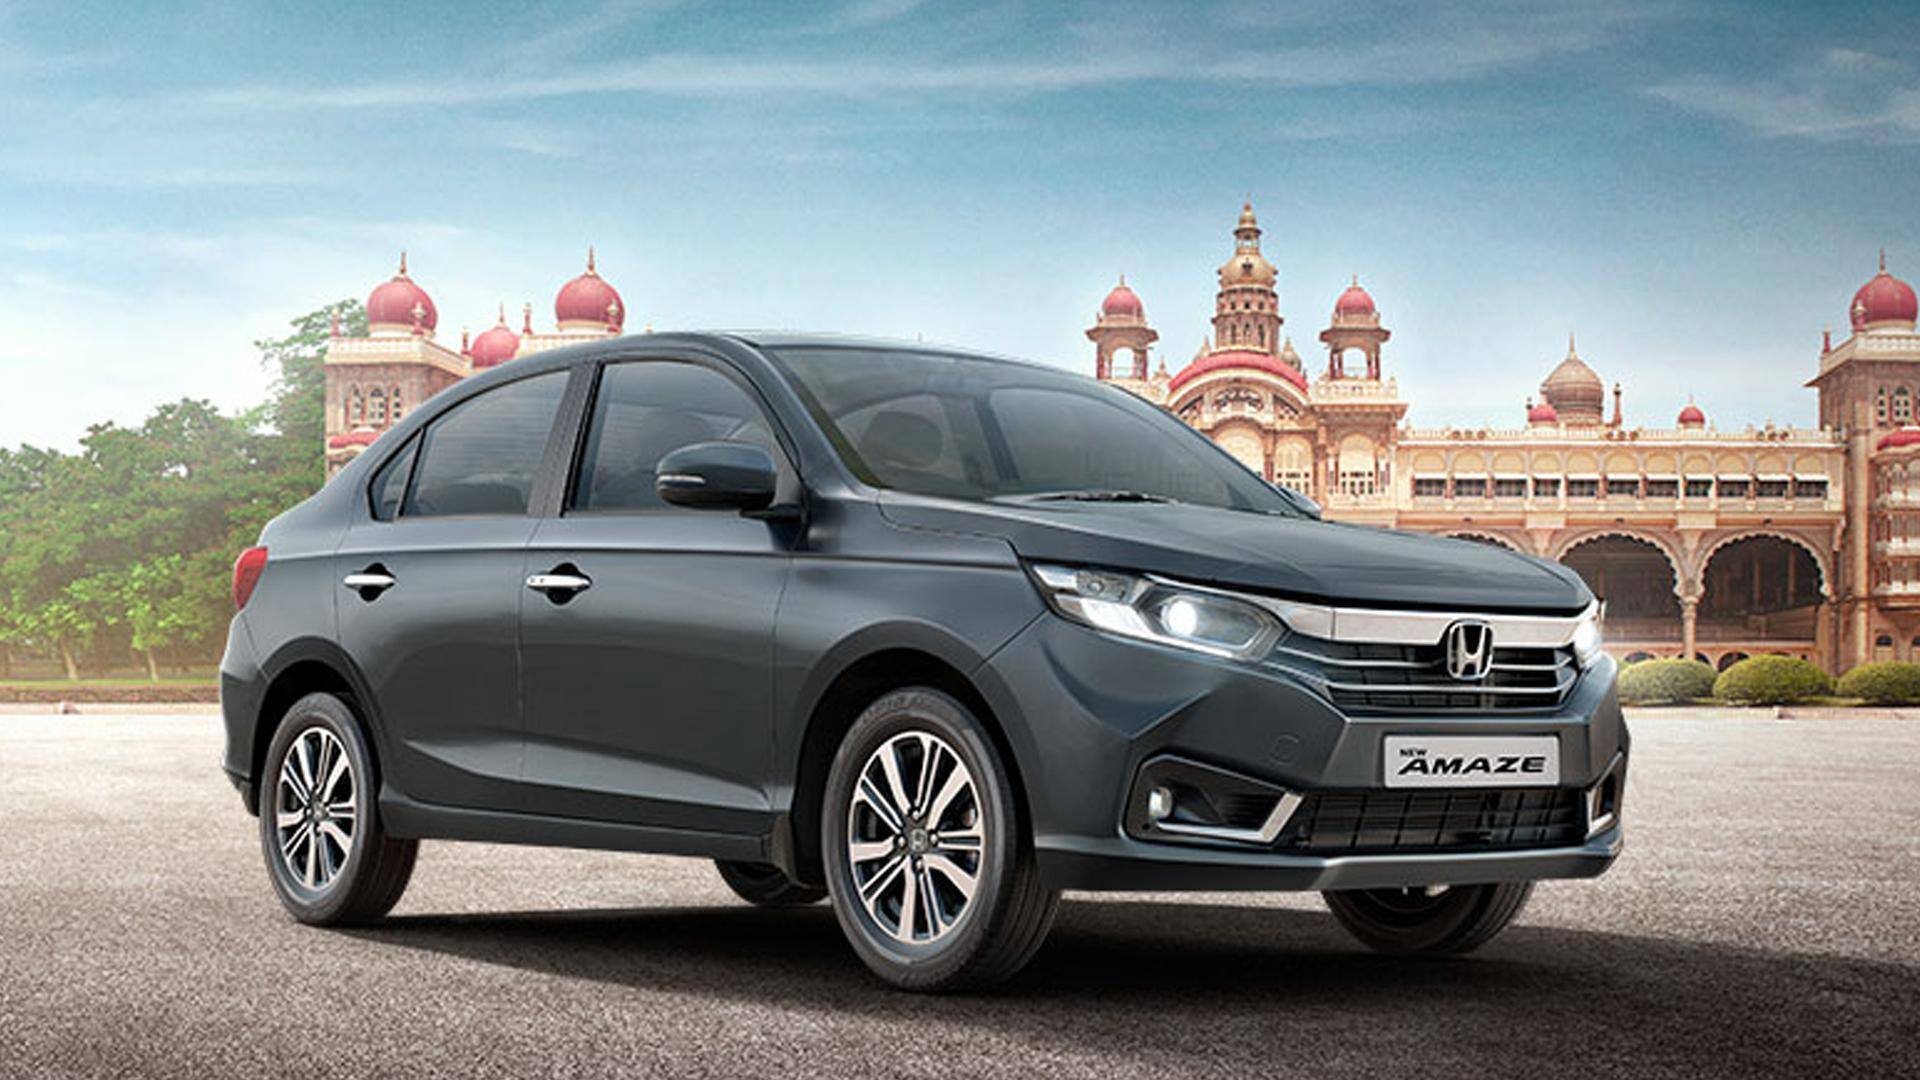 Get up to ₹83,000 discount on Honda cars this month